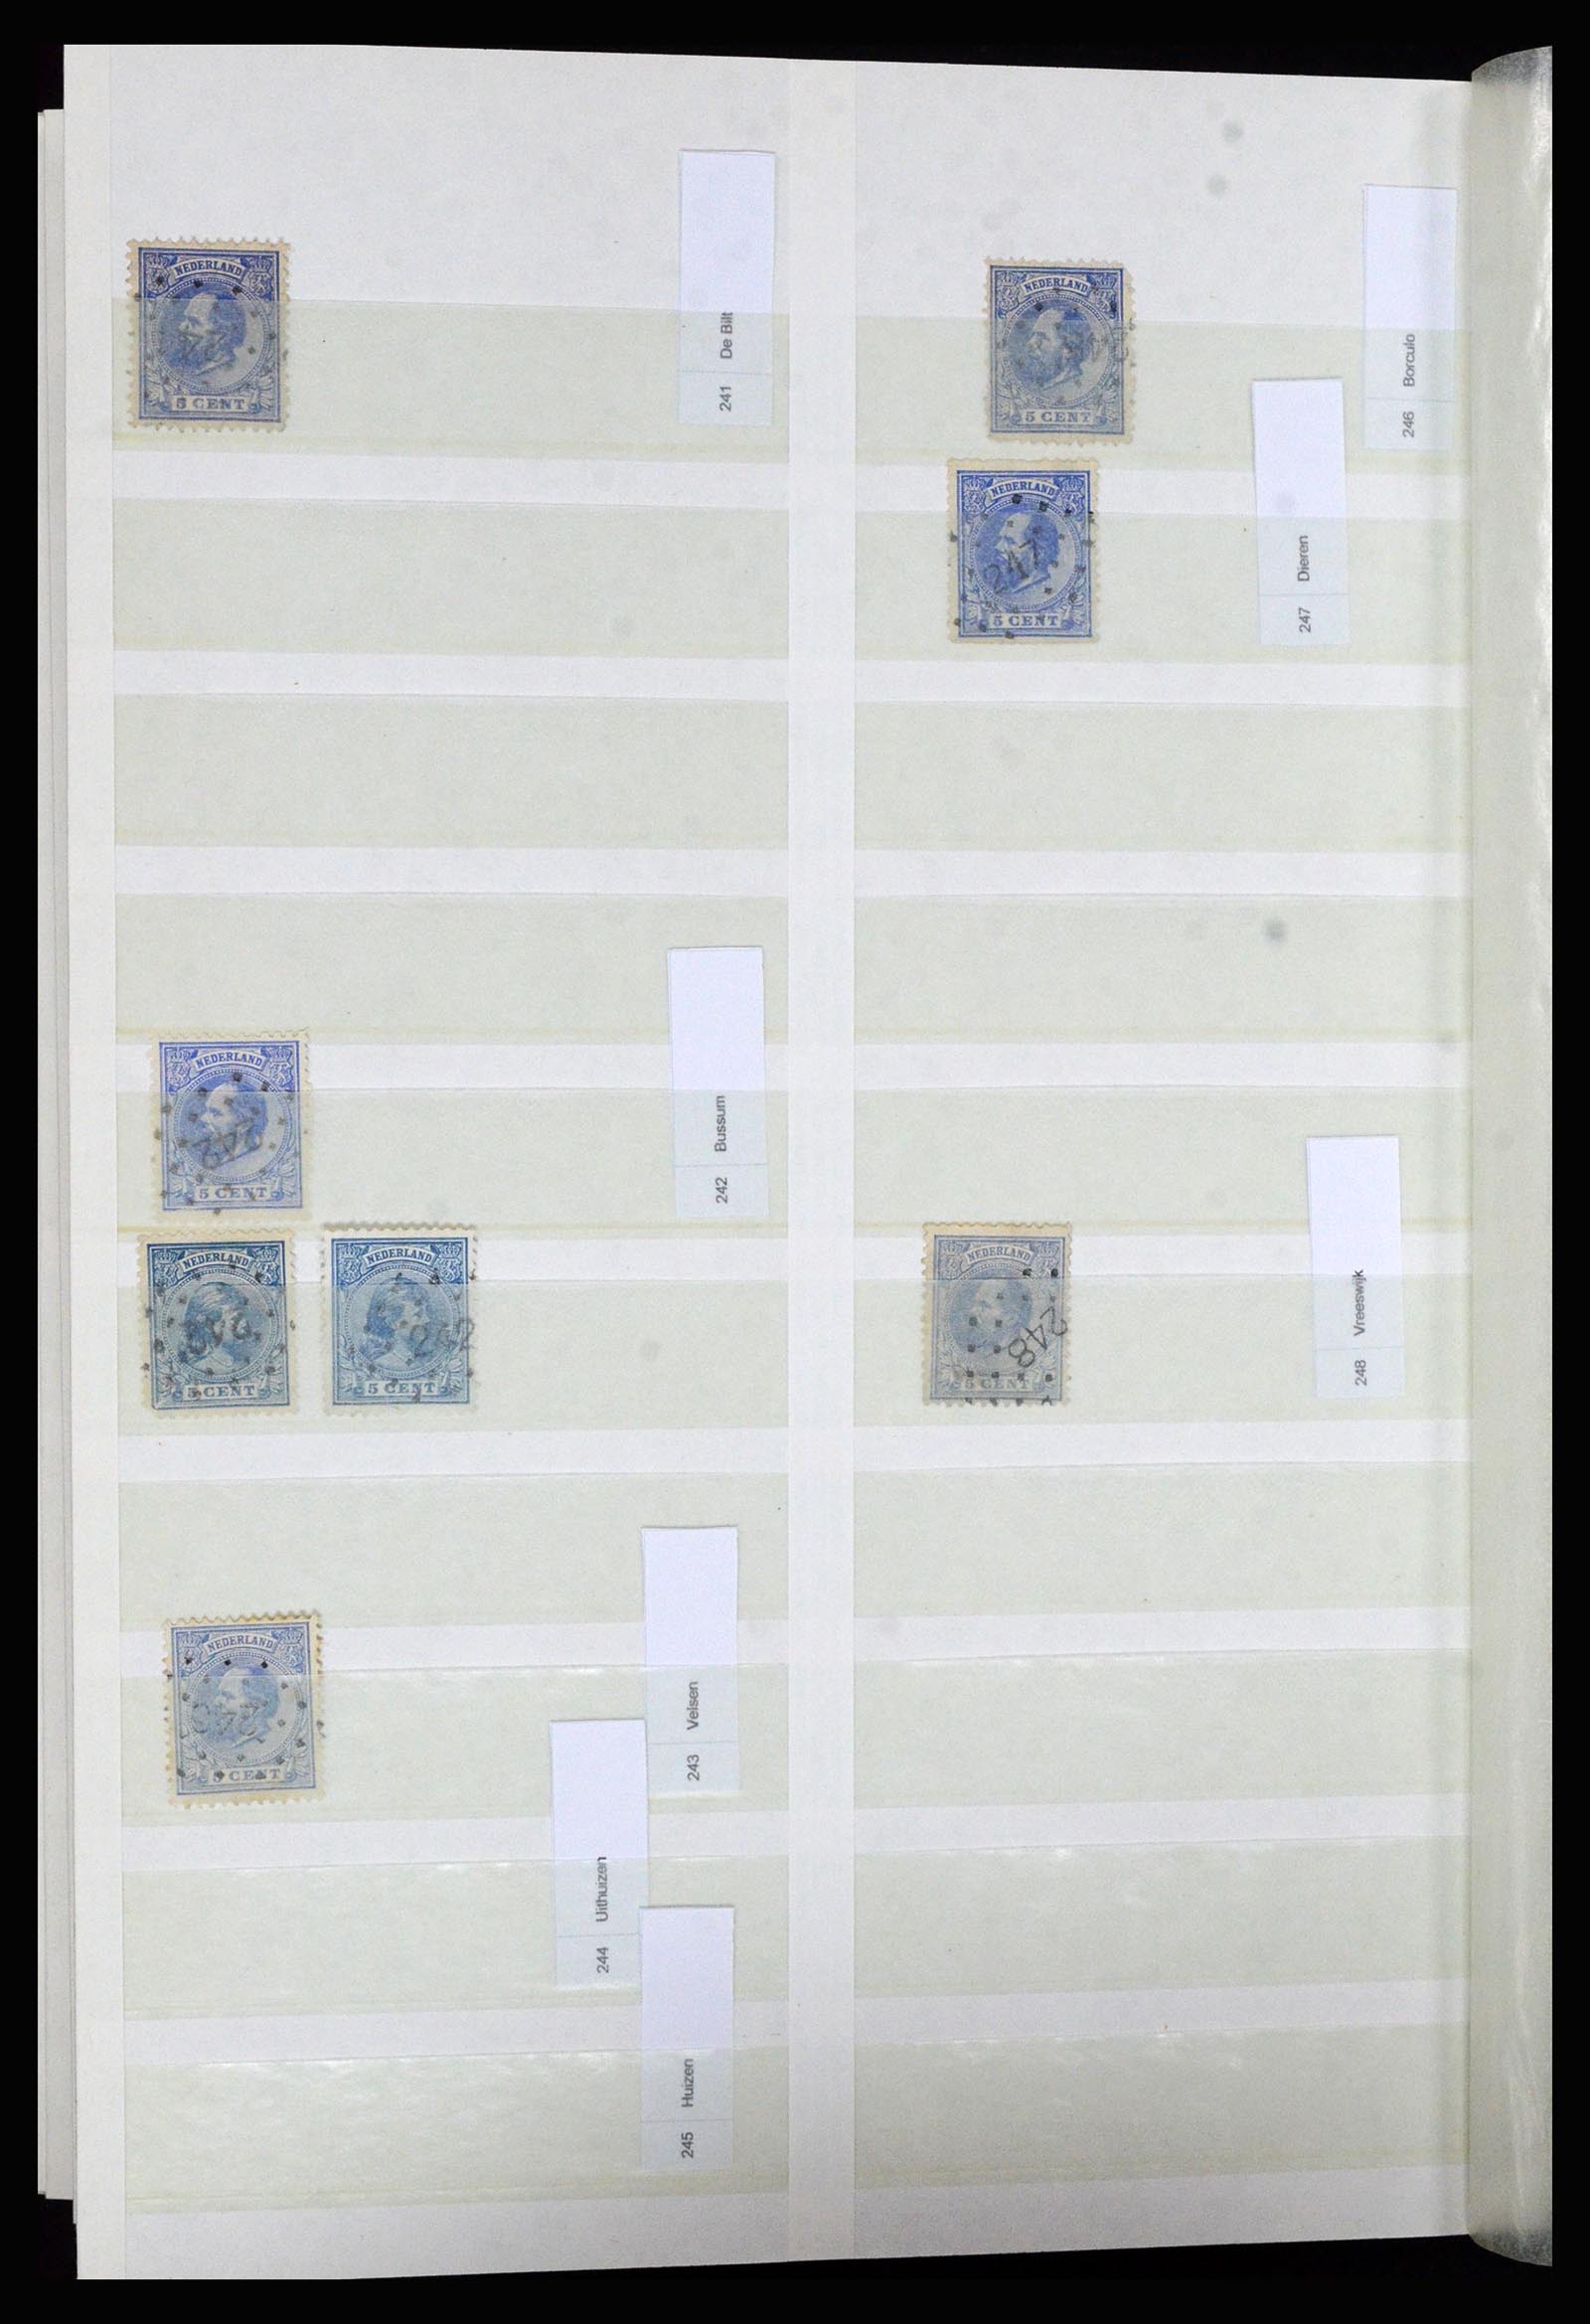 36739 046 - Stamp collection 36739 Netherlands numeral cancels.